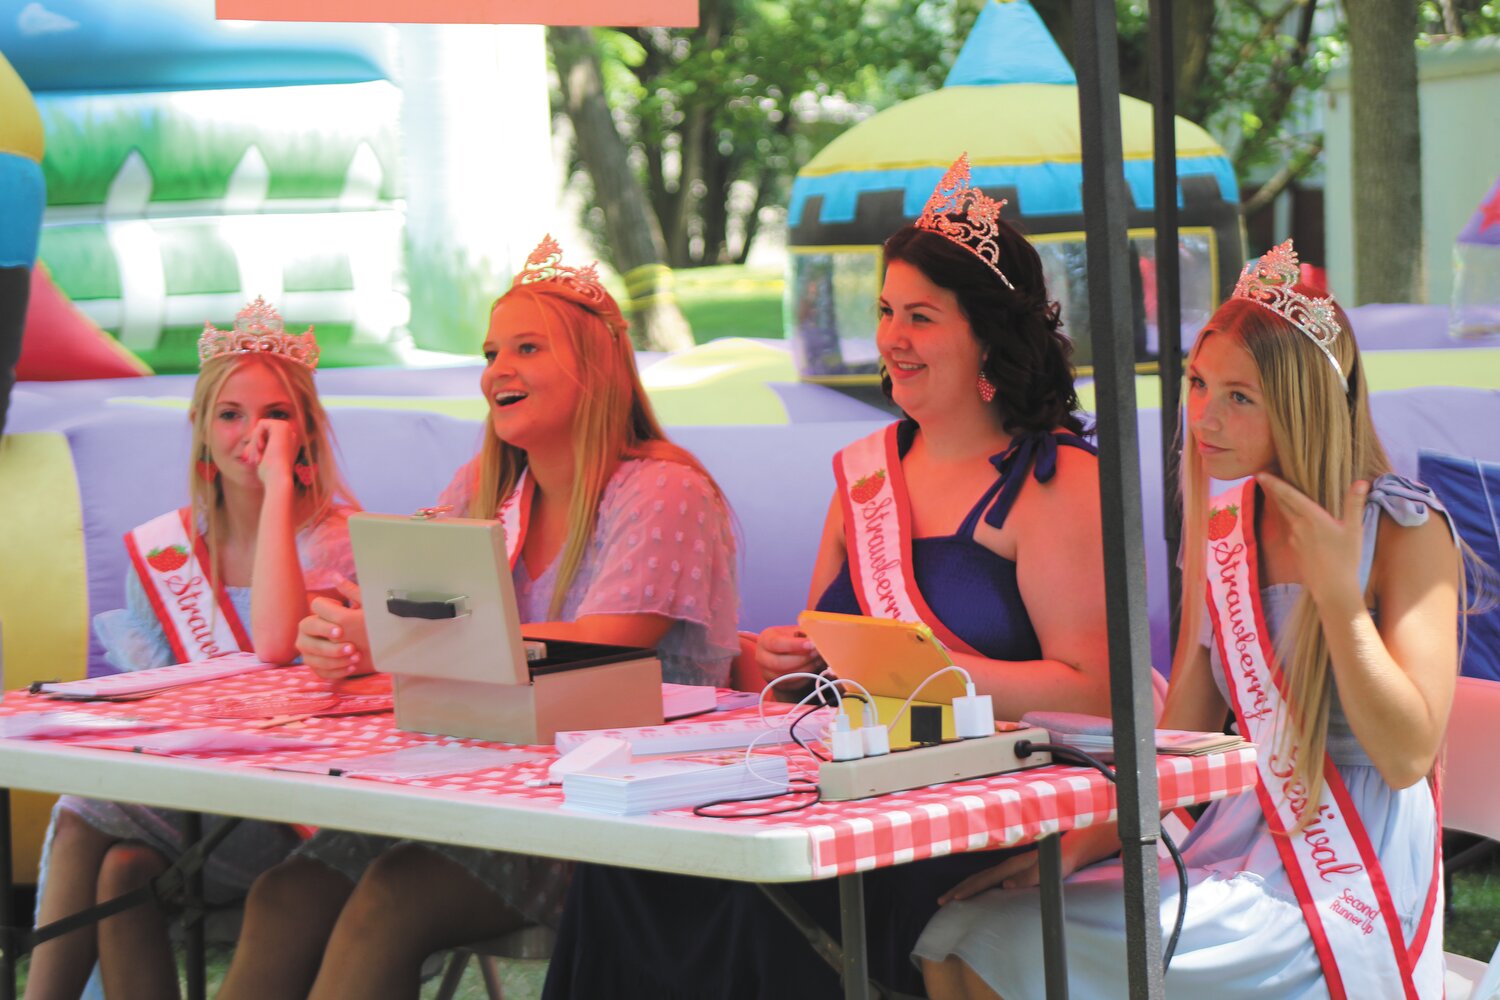 Strawberry Festival royalty sell tickets in the Children's Area.